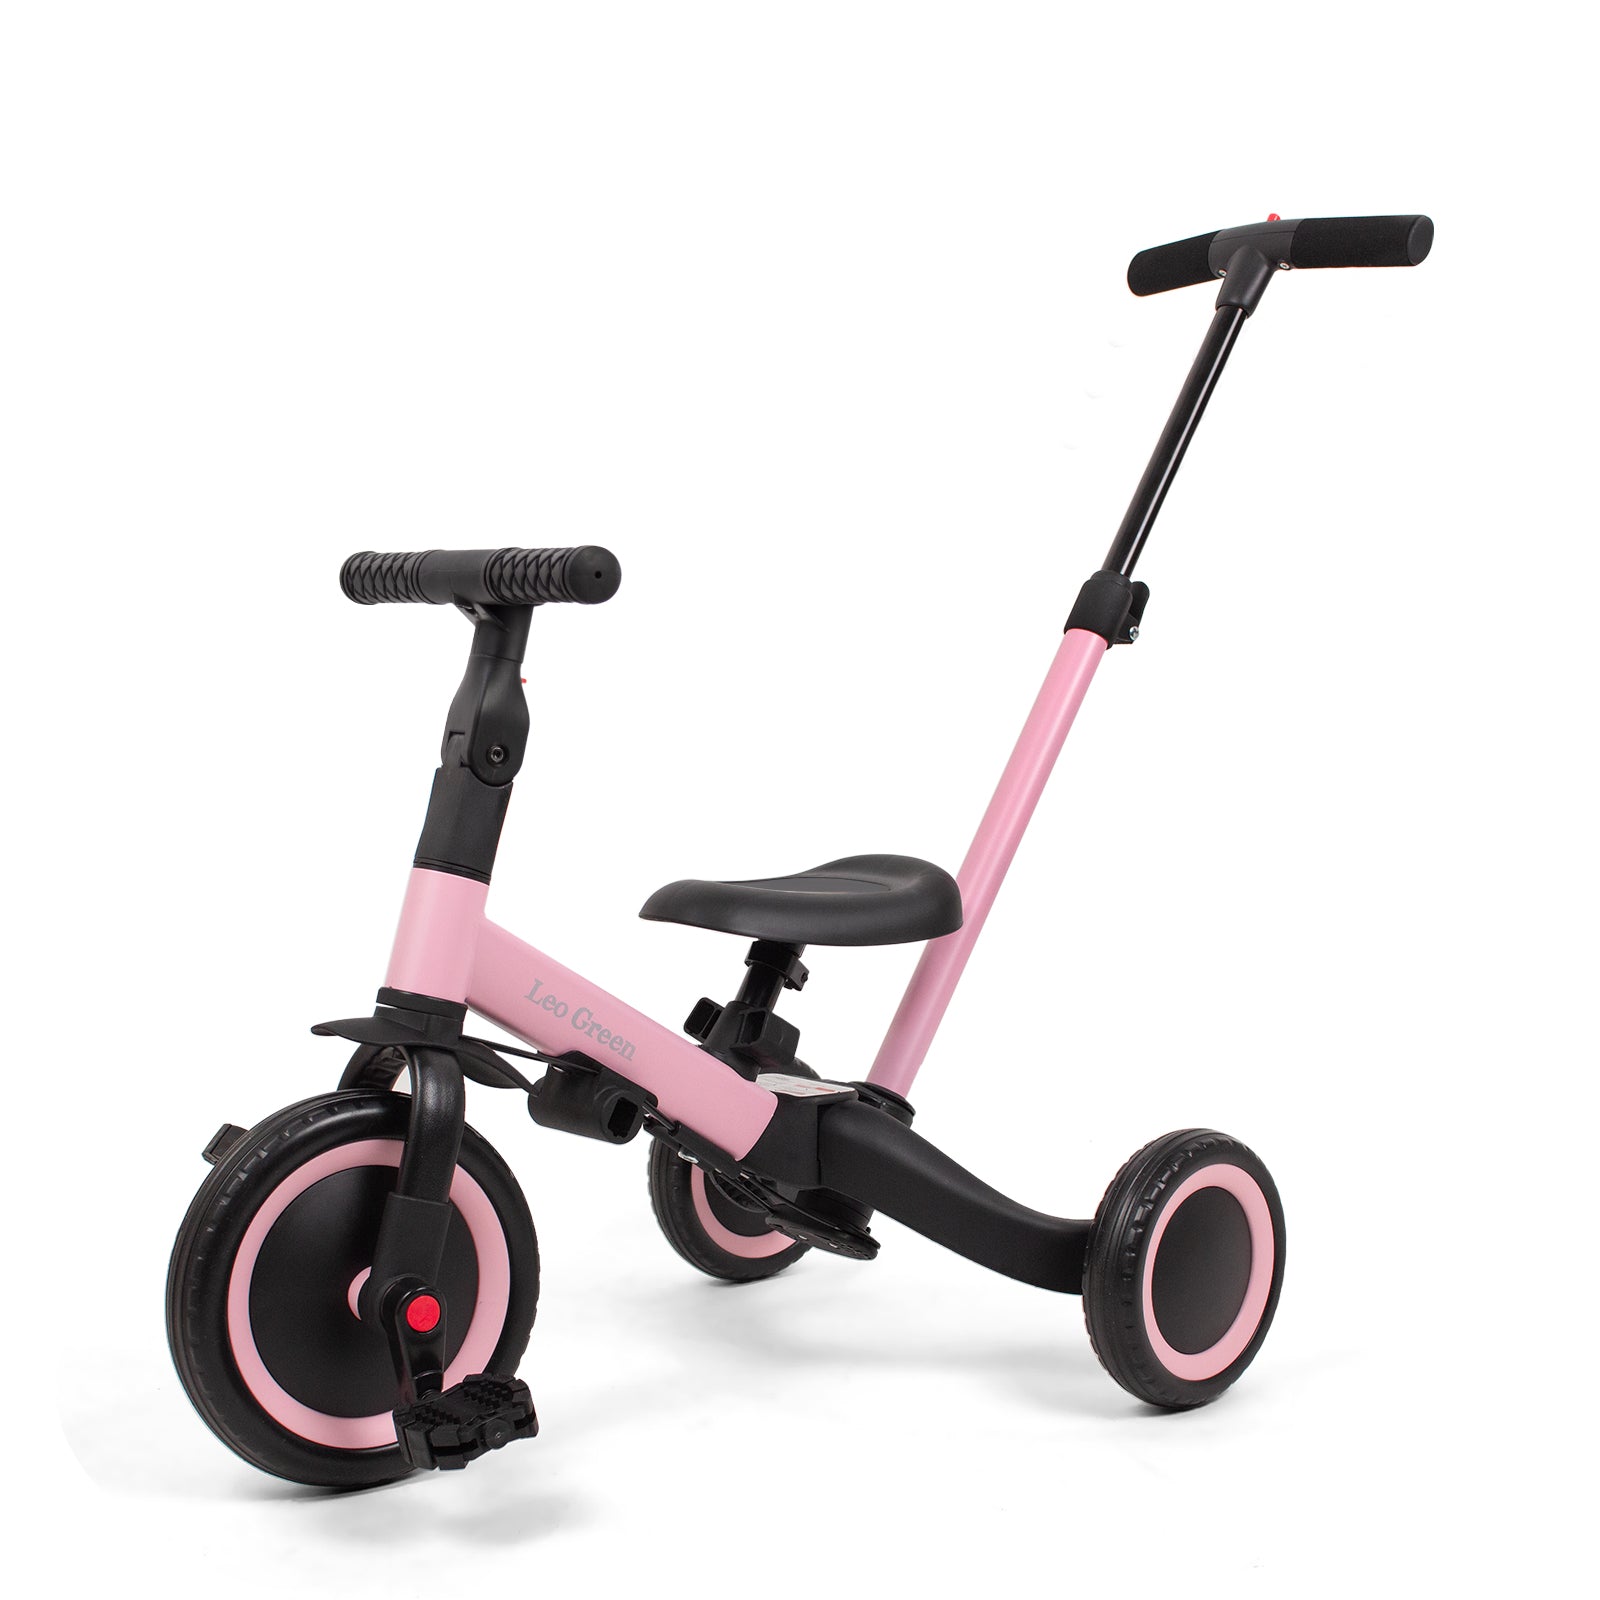 4-in-1-Children-s-Tricycle-Bike-Balance-Bike-Balance-Bike-with-Push-Bar-for-Boys-Girls-Ages-1-to-3-Load-25-kg-Pink-4-in-1-Children-s-Tricycle-Bike-Pink